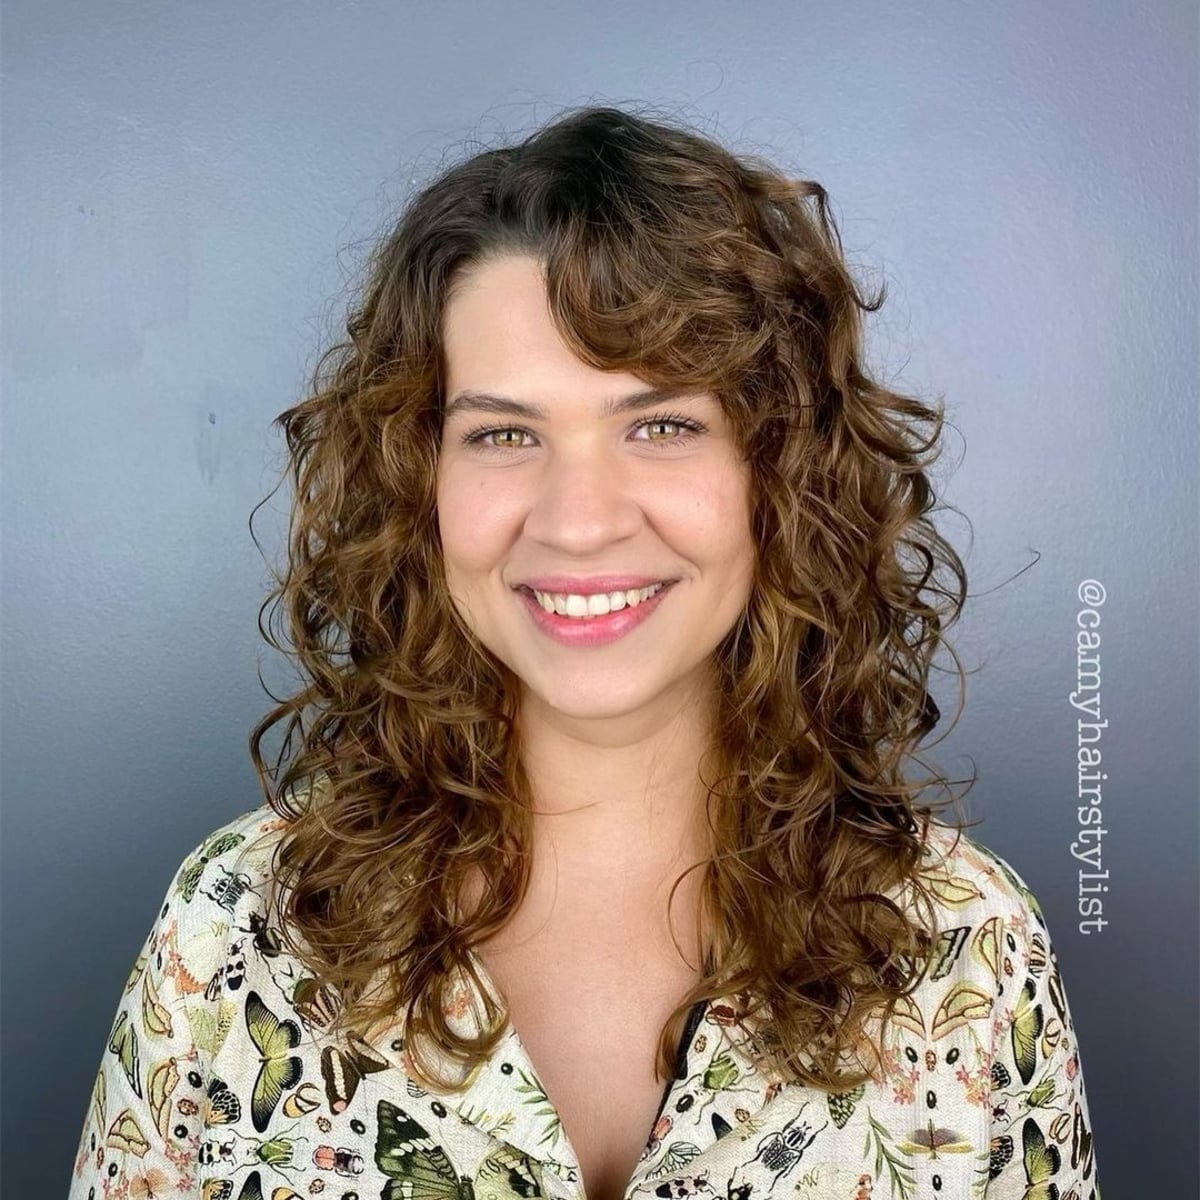 Layered curly locks with side bangs